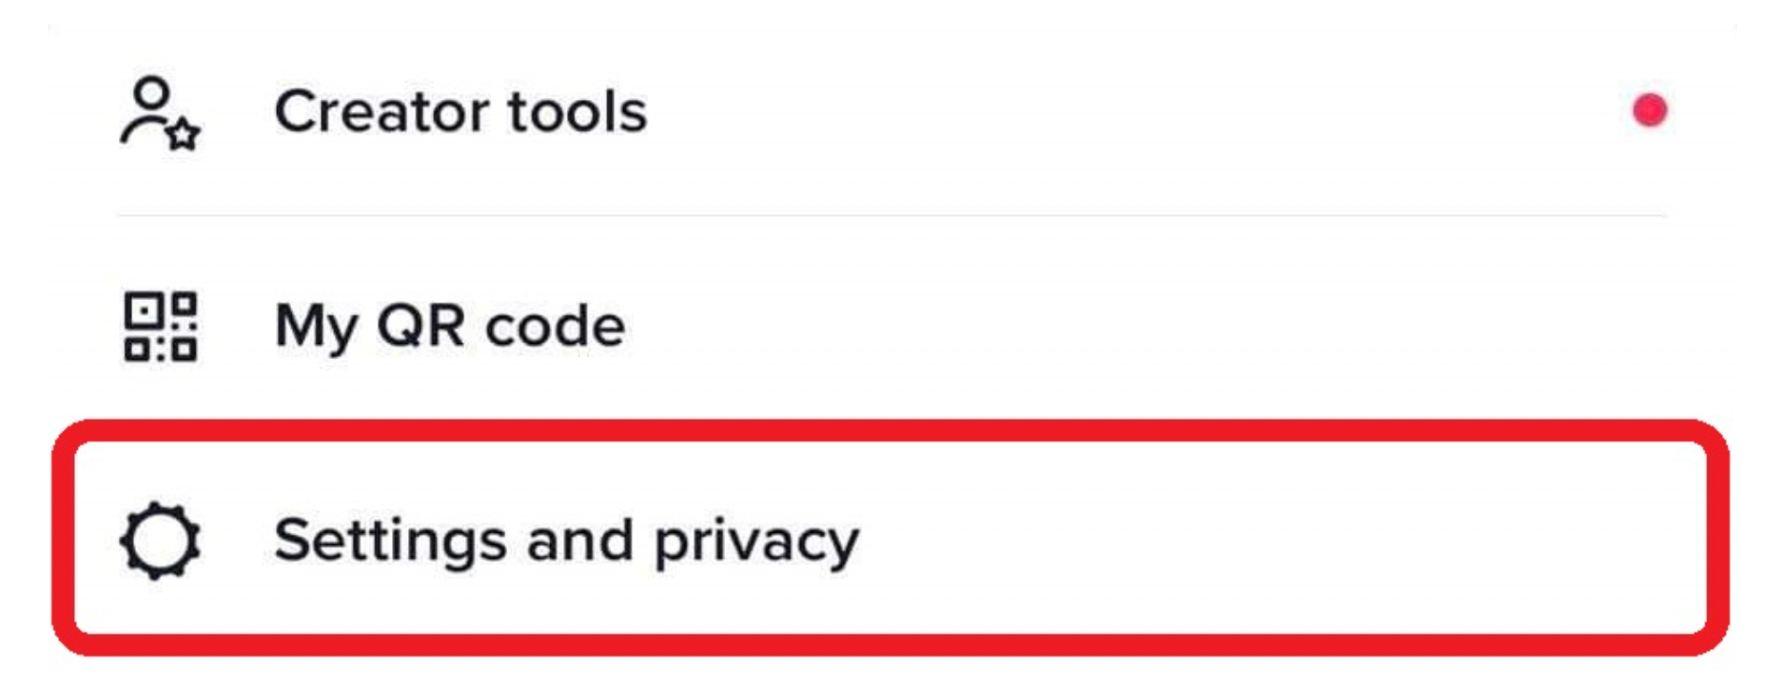 tiktok profile settings menu with the settings and privacy option highlighted